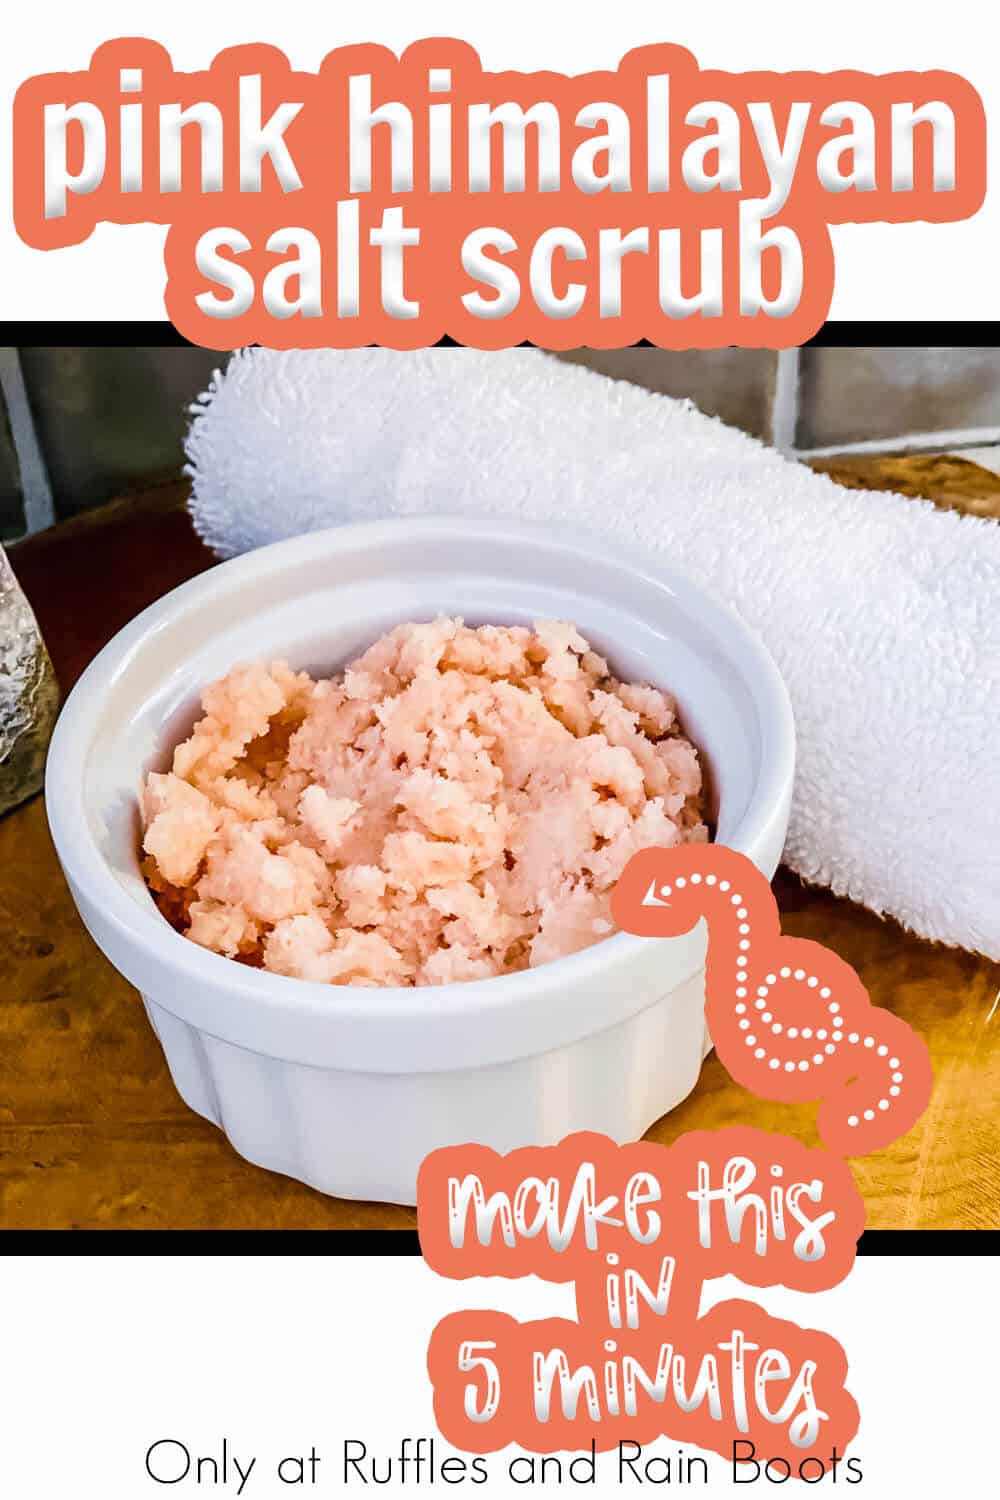 diy salt scrub recipe with text which reads pink himalayan salt scrub make this in 5-minutes!